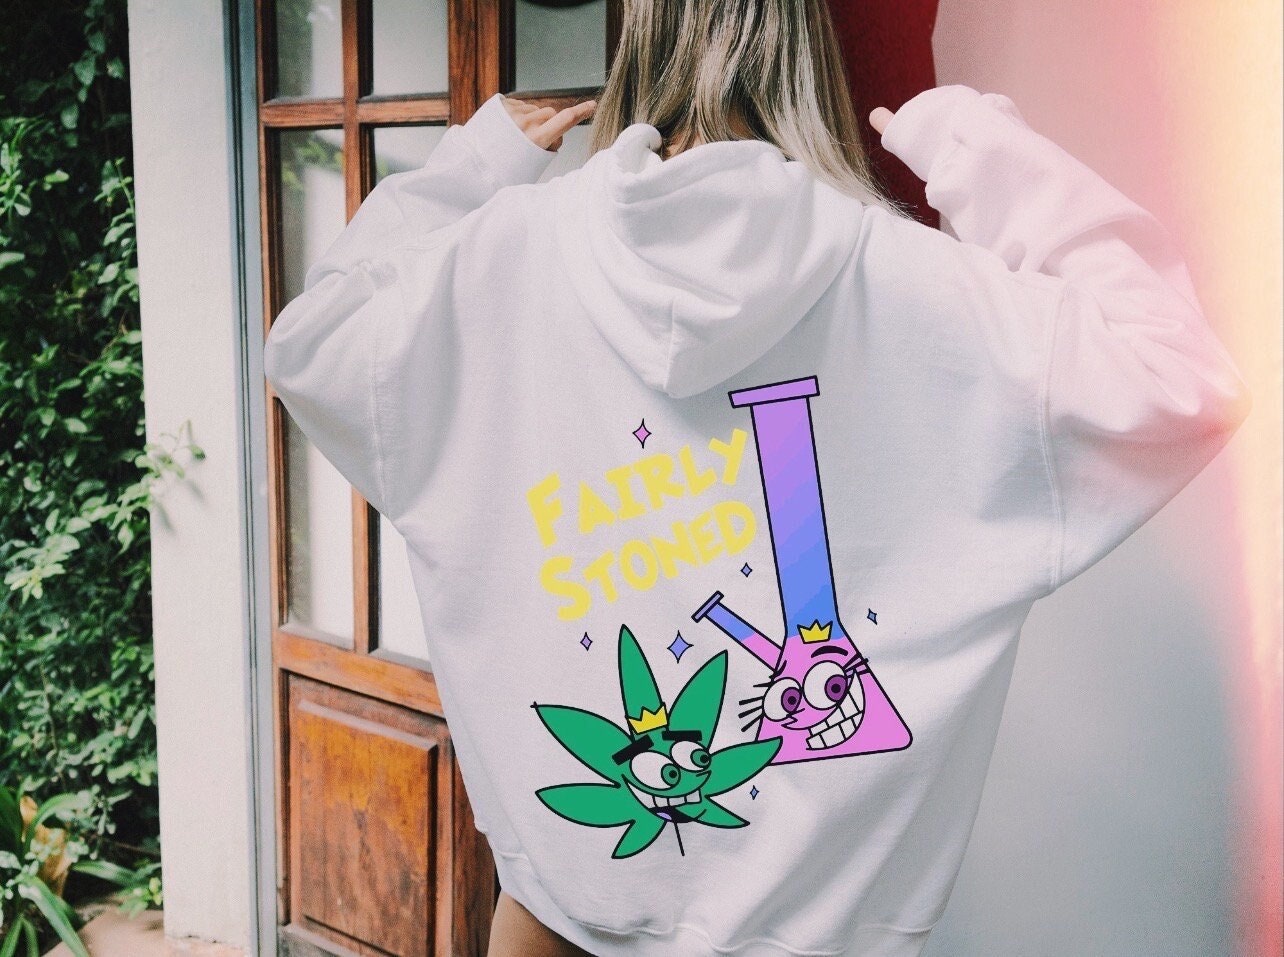 Check out the 5 best selling hoodies from Weed-hoodie's online store, you will be amazed